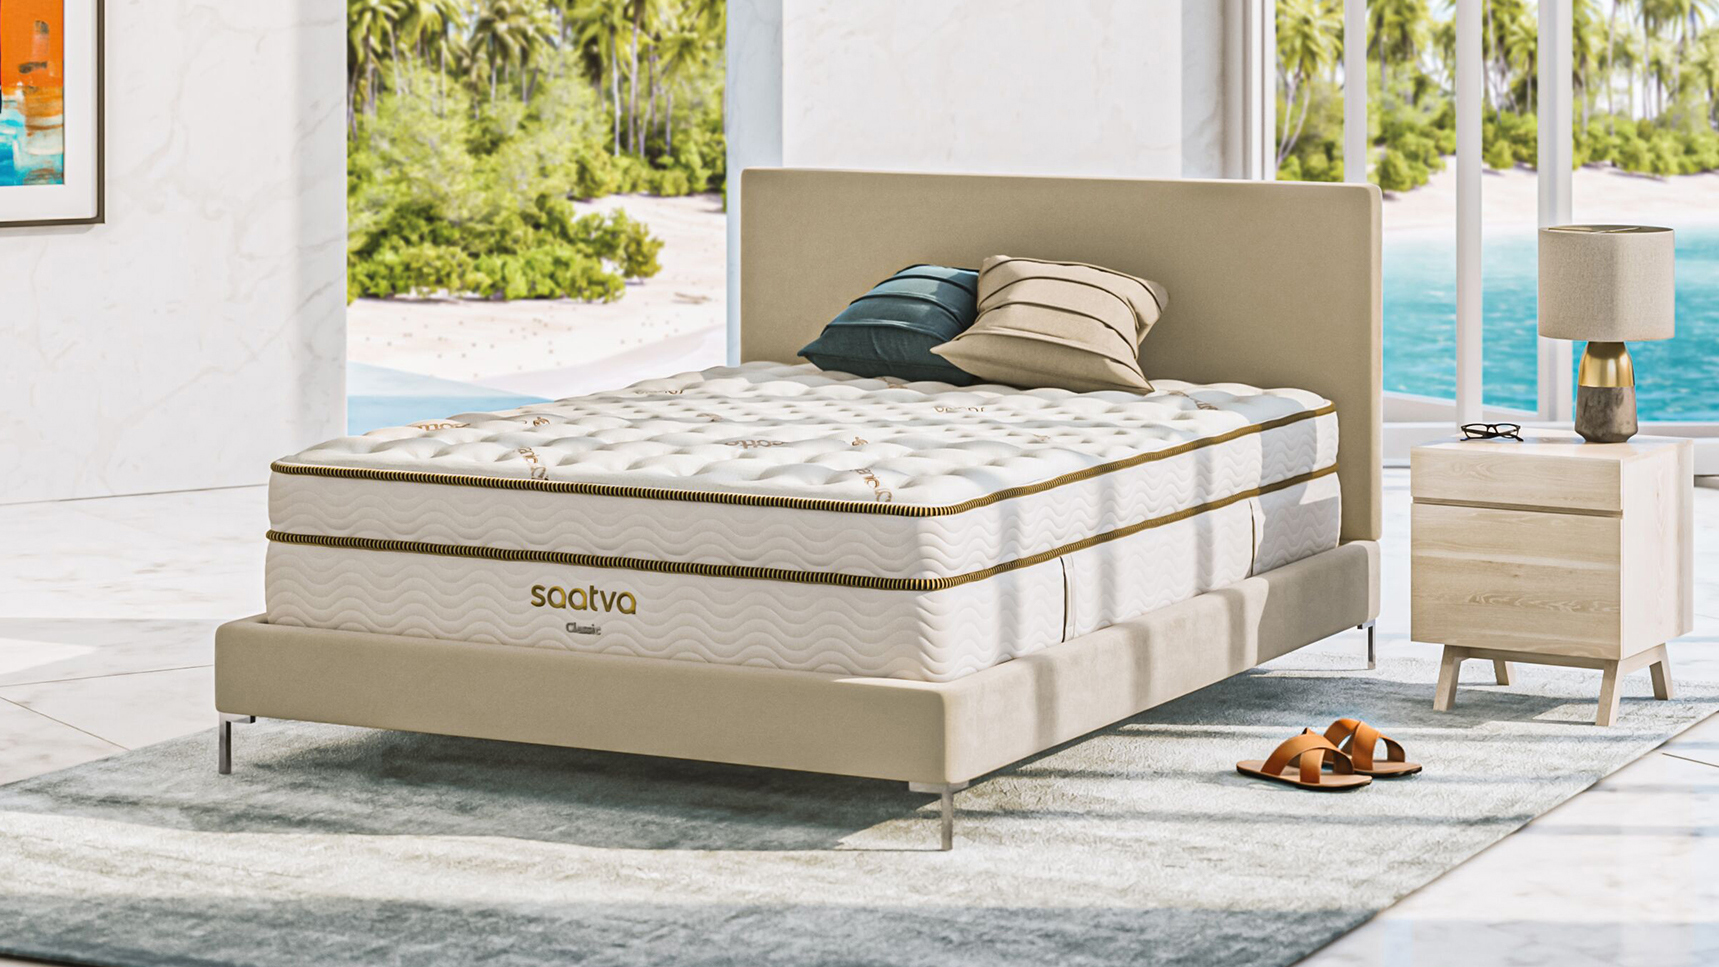 Photo shows the Saatva Classic innerspring hybrid on a luxury bed base placed in a summer home overlooking a blue pool